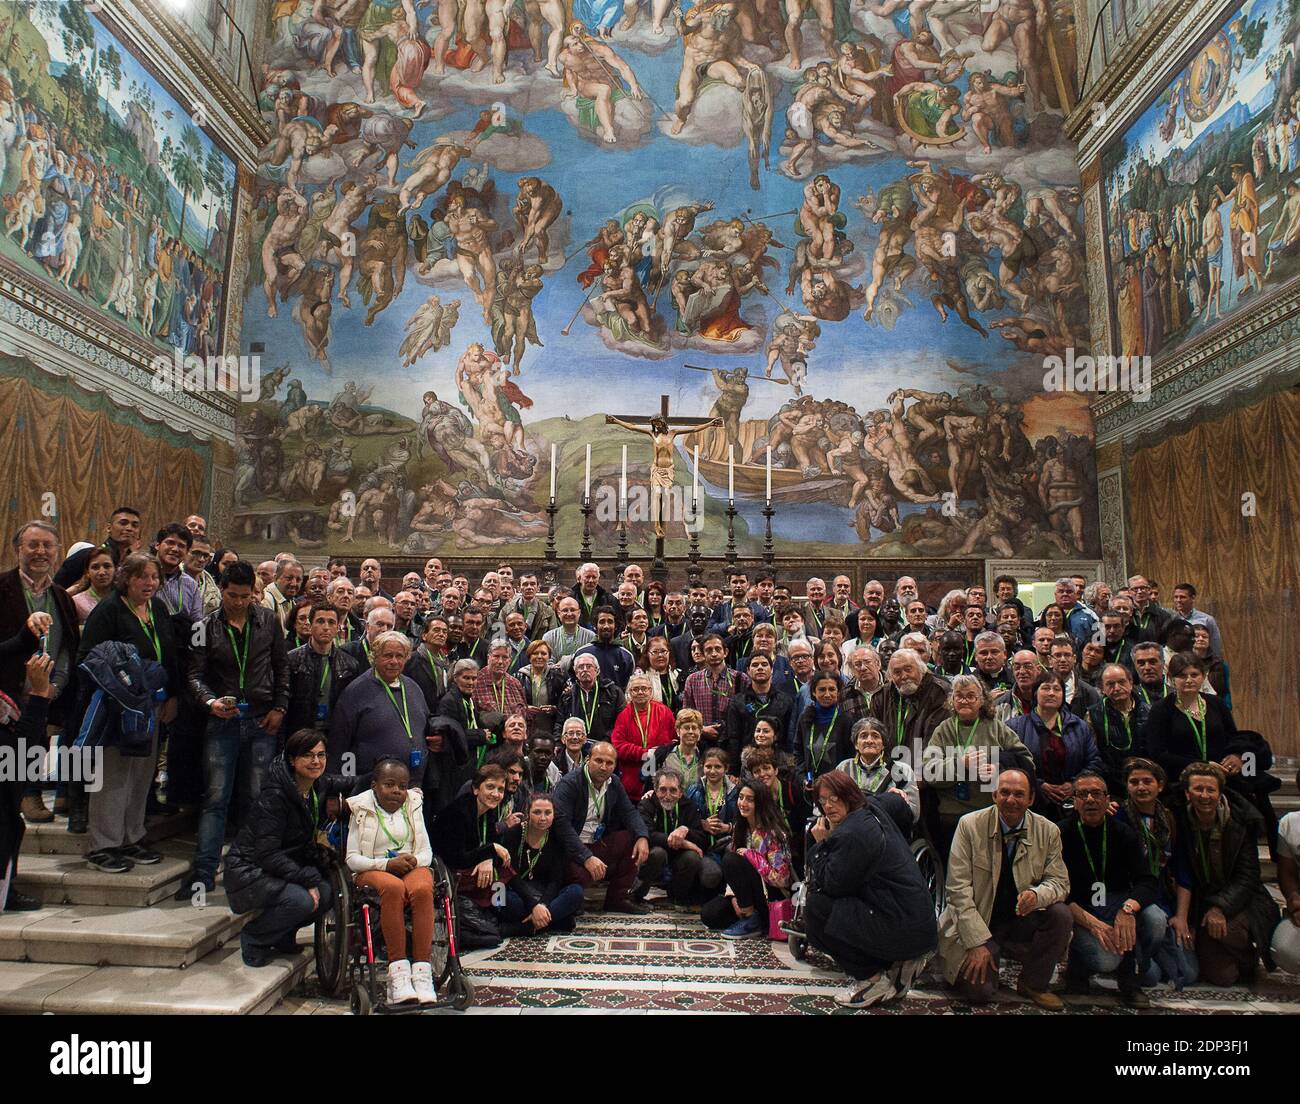 On March 26, 2015 guest of the Vatican a group of 150 homeless people got a private guided tour in the Sistine Chapel .The number of homeless around Saint Peter?s square has doubled in the past six months as the Pontiff makes a difference in the lives of so many people. Instead of trying to eradicate its homeless population the Vatican is actually helping them. Pope Francis has pledged to restore dignity to these persons by providing for their needs, all without judging them. And homeless people are migrating to the Vatican to spend each night in sleeping bags donated by the Church. Police off Stock Photo